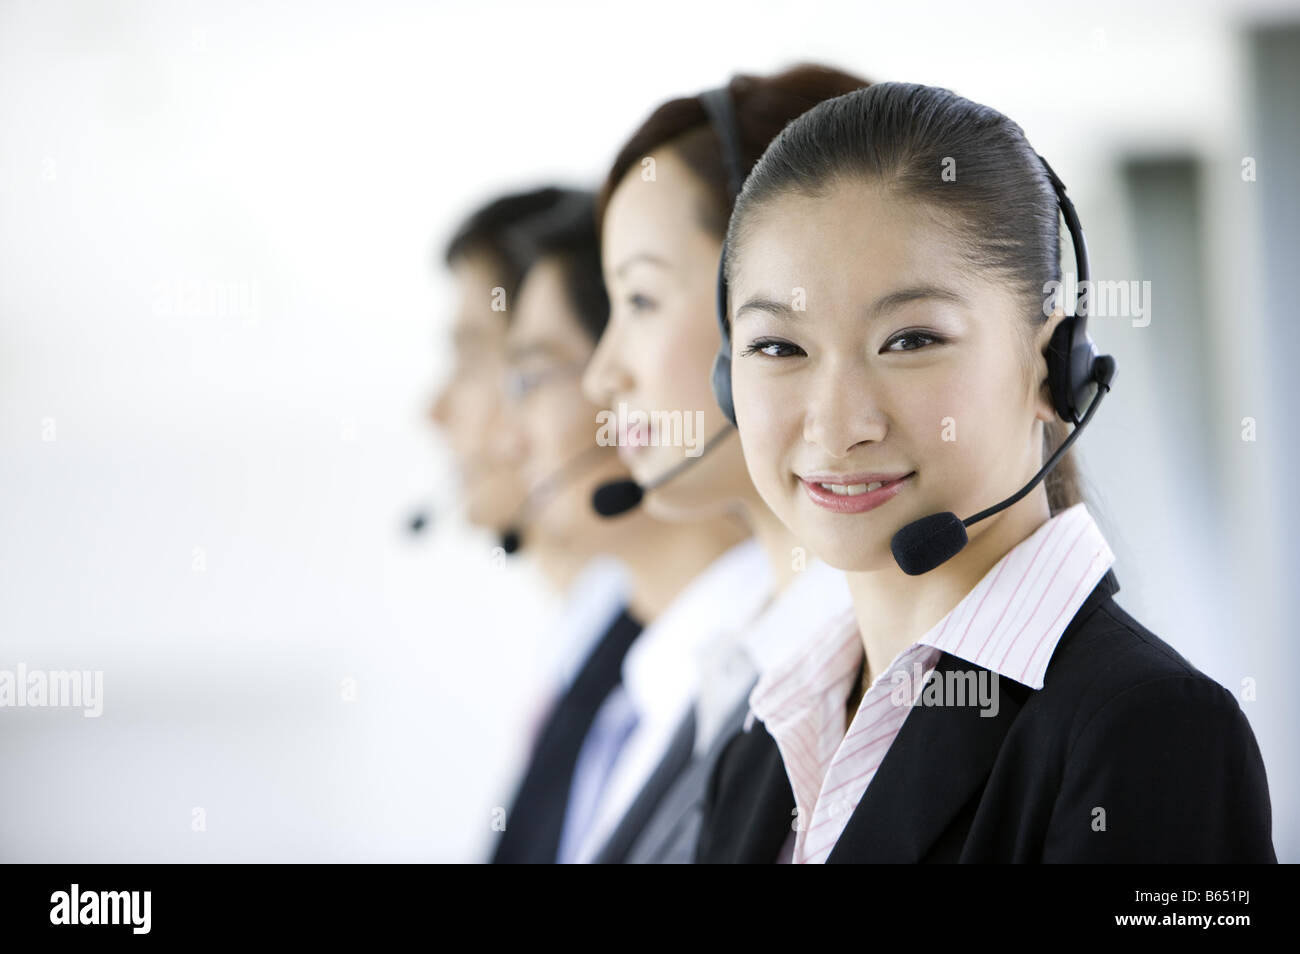 Business people wearing head phone in a row Stock Photo